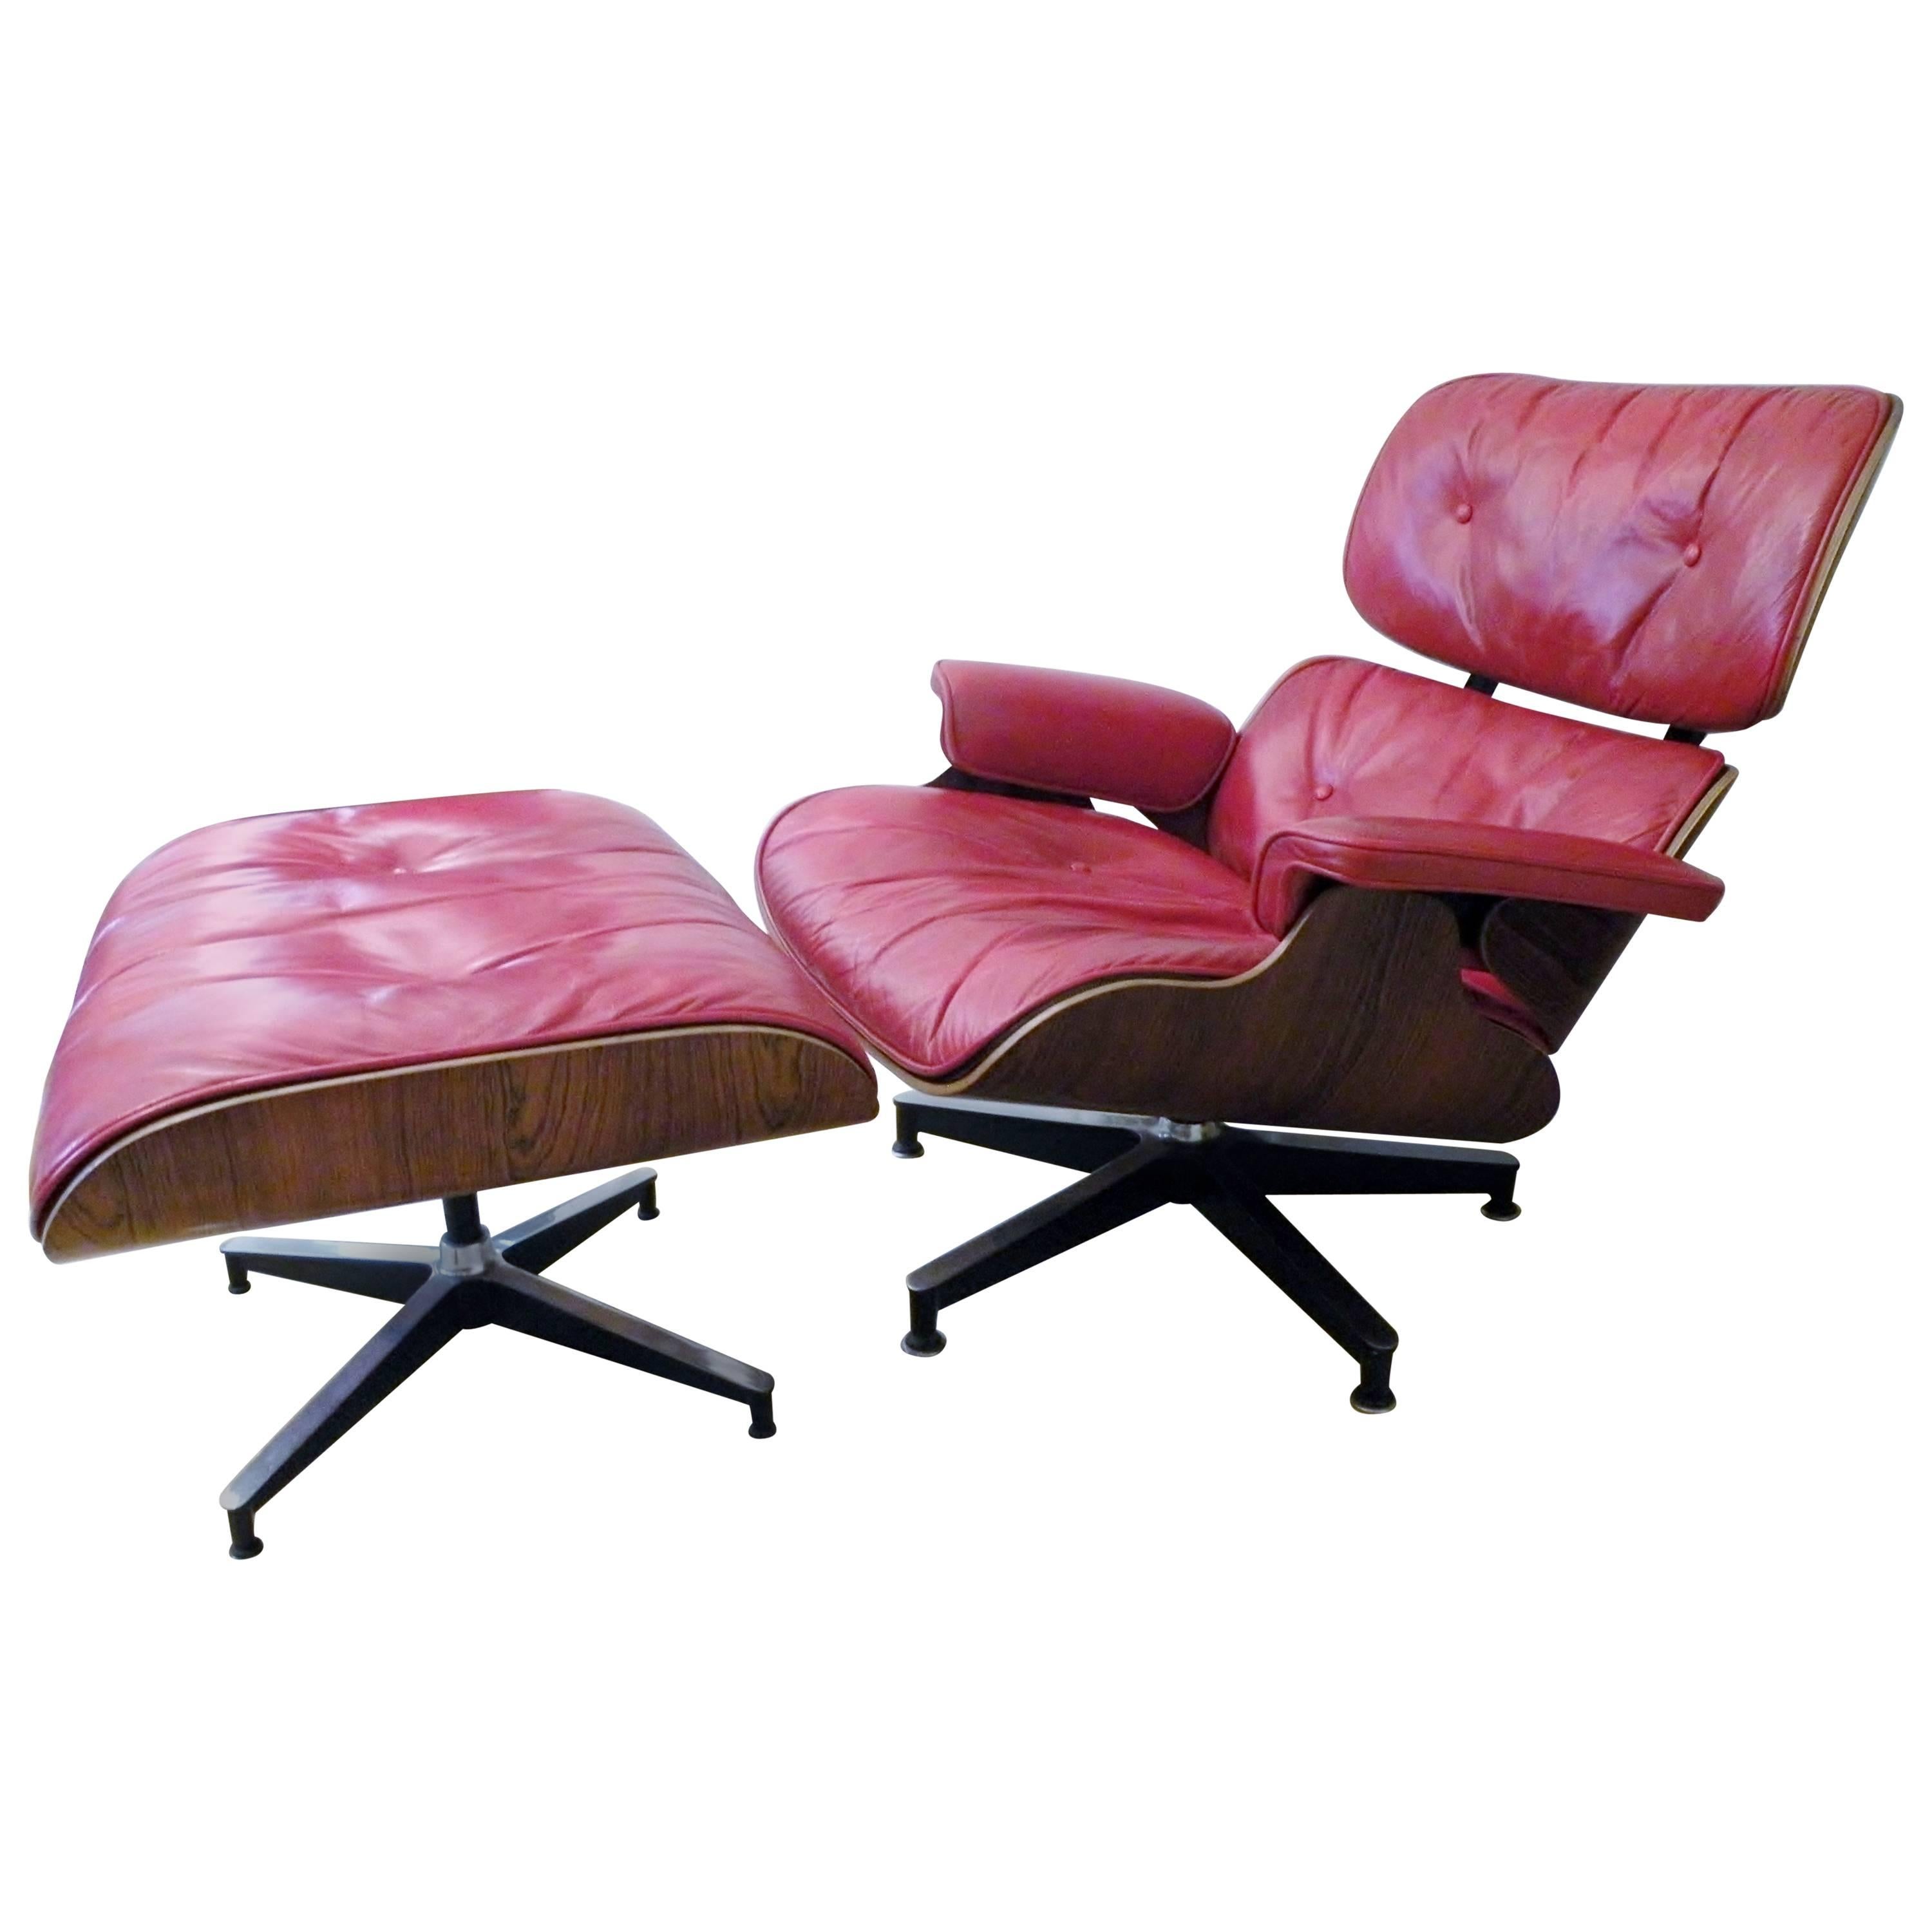 1960s Charles & Ray Eames Custom Red 670 671 Lounge Chair Ottoman Herman Miller